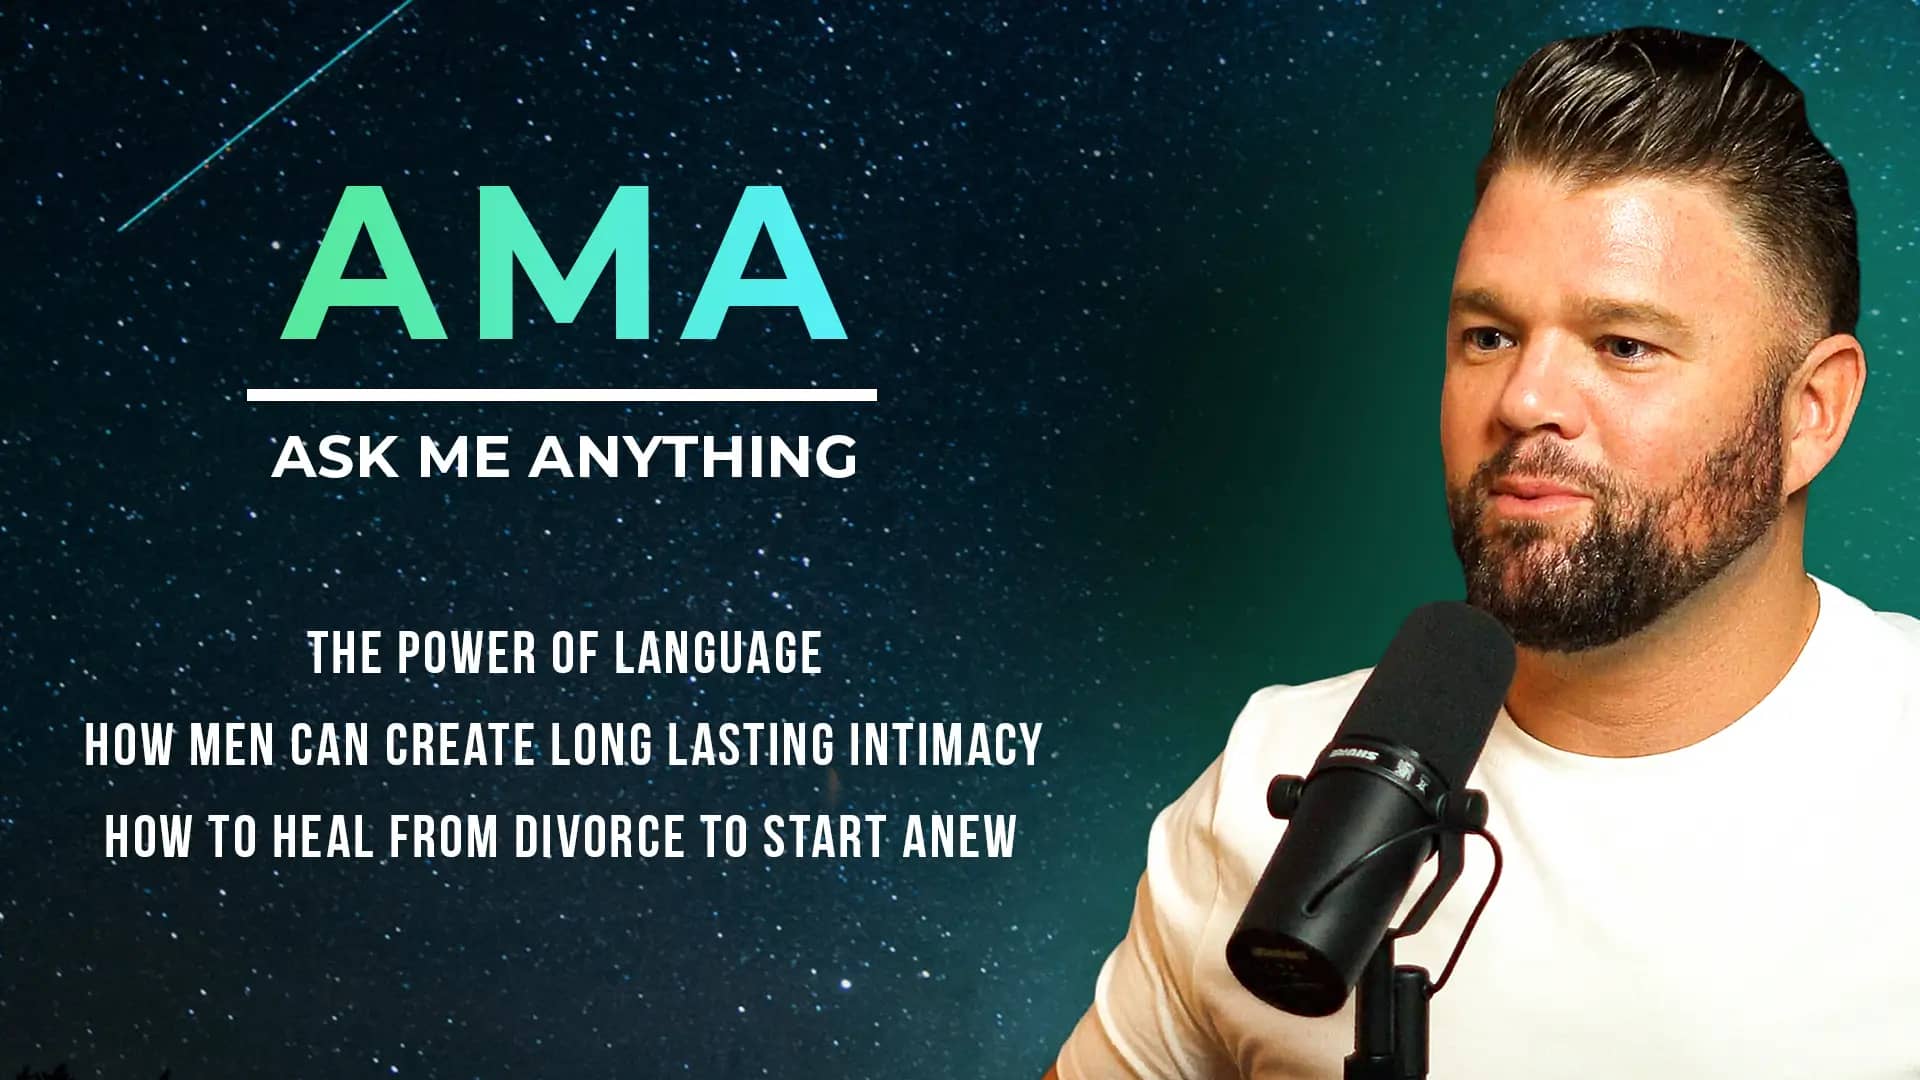 AMA: The Power of Language, How Men Can Create Long Lasting Intimacy + How To Heal From Divorce To Start Anew